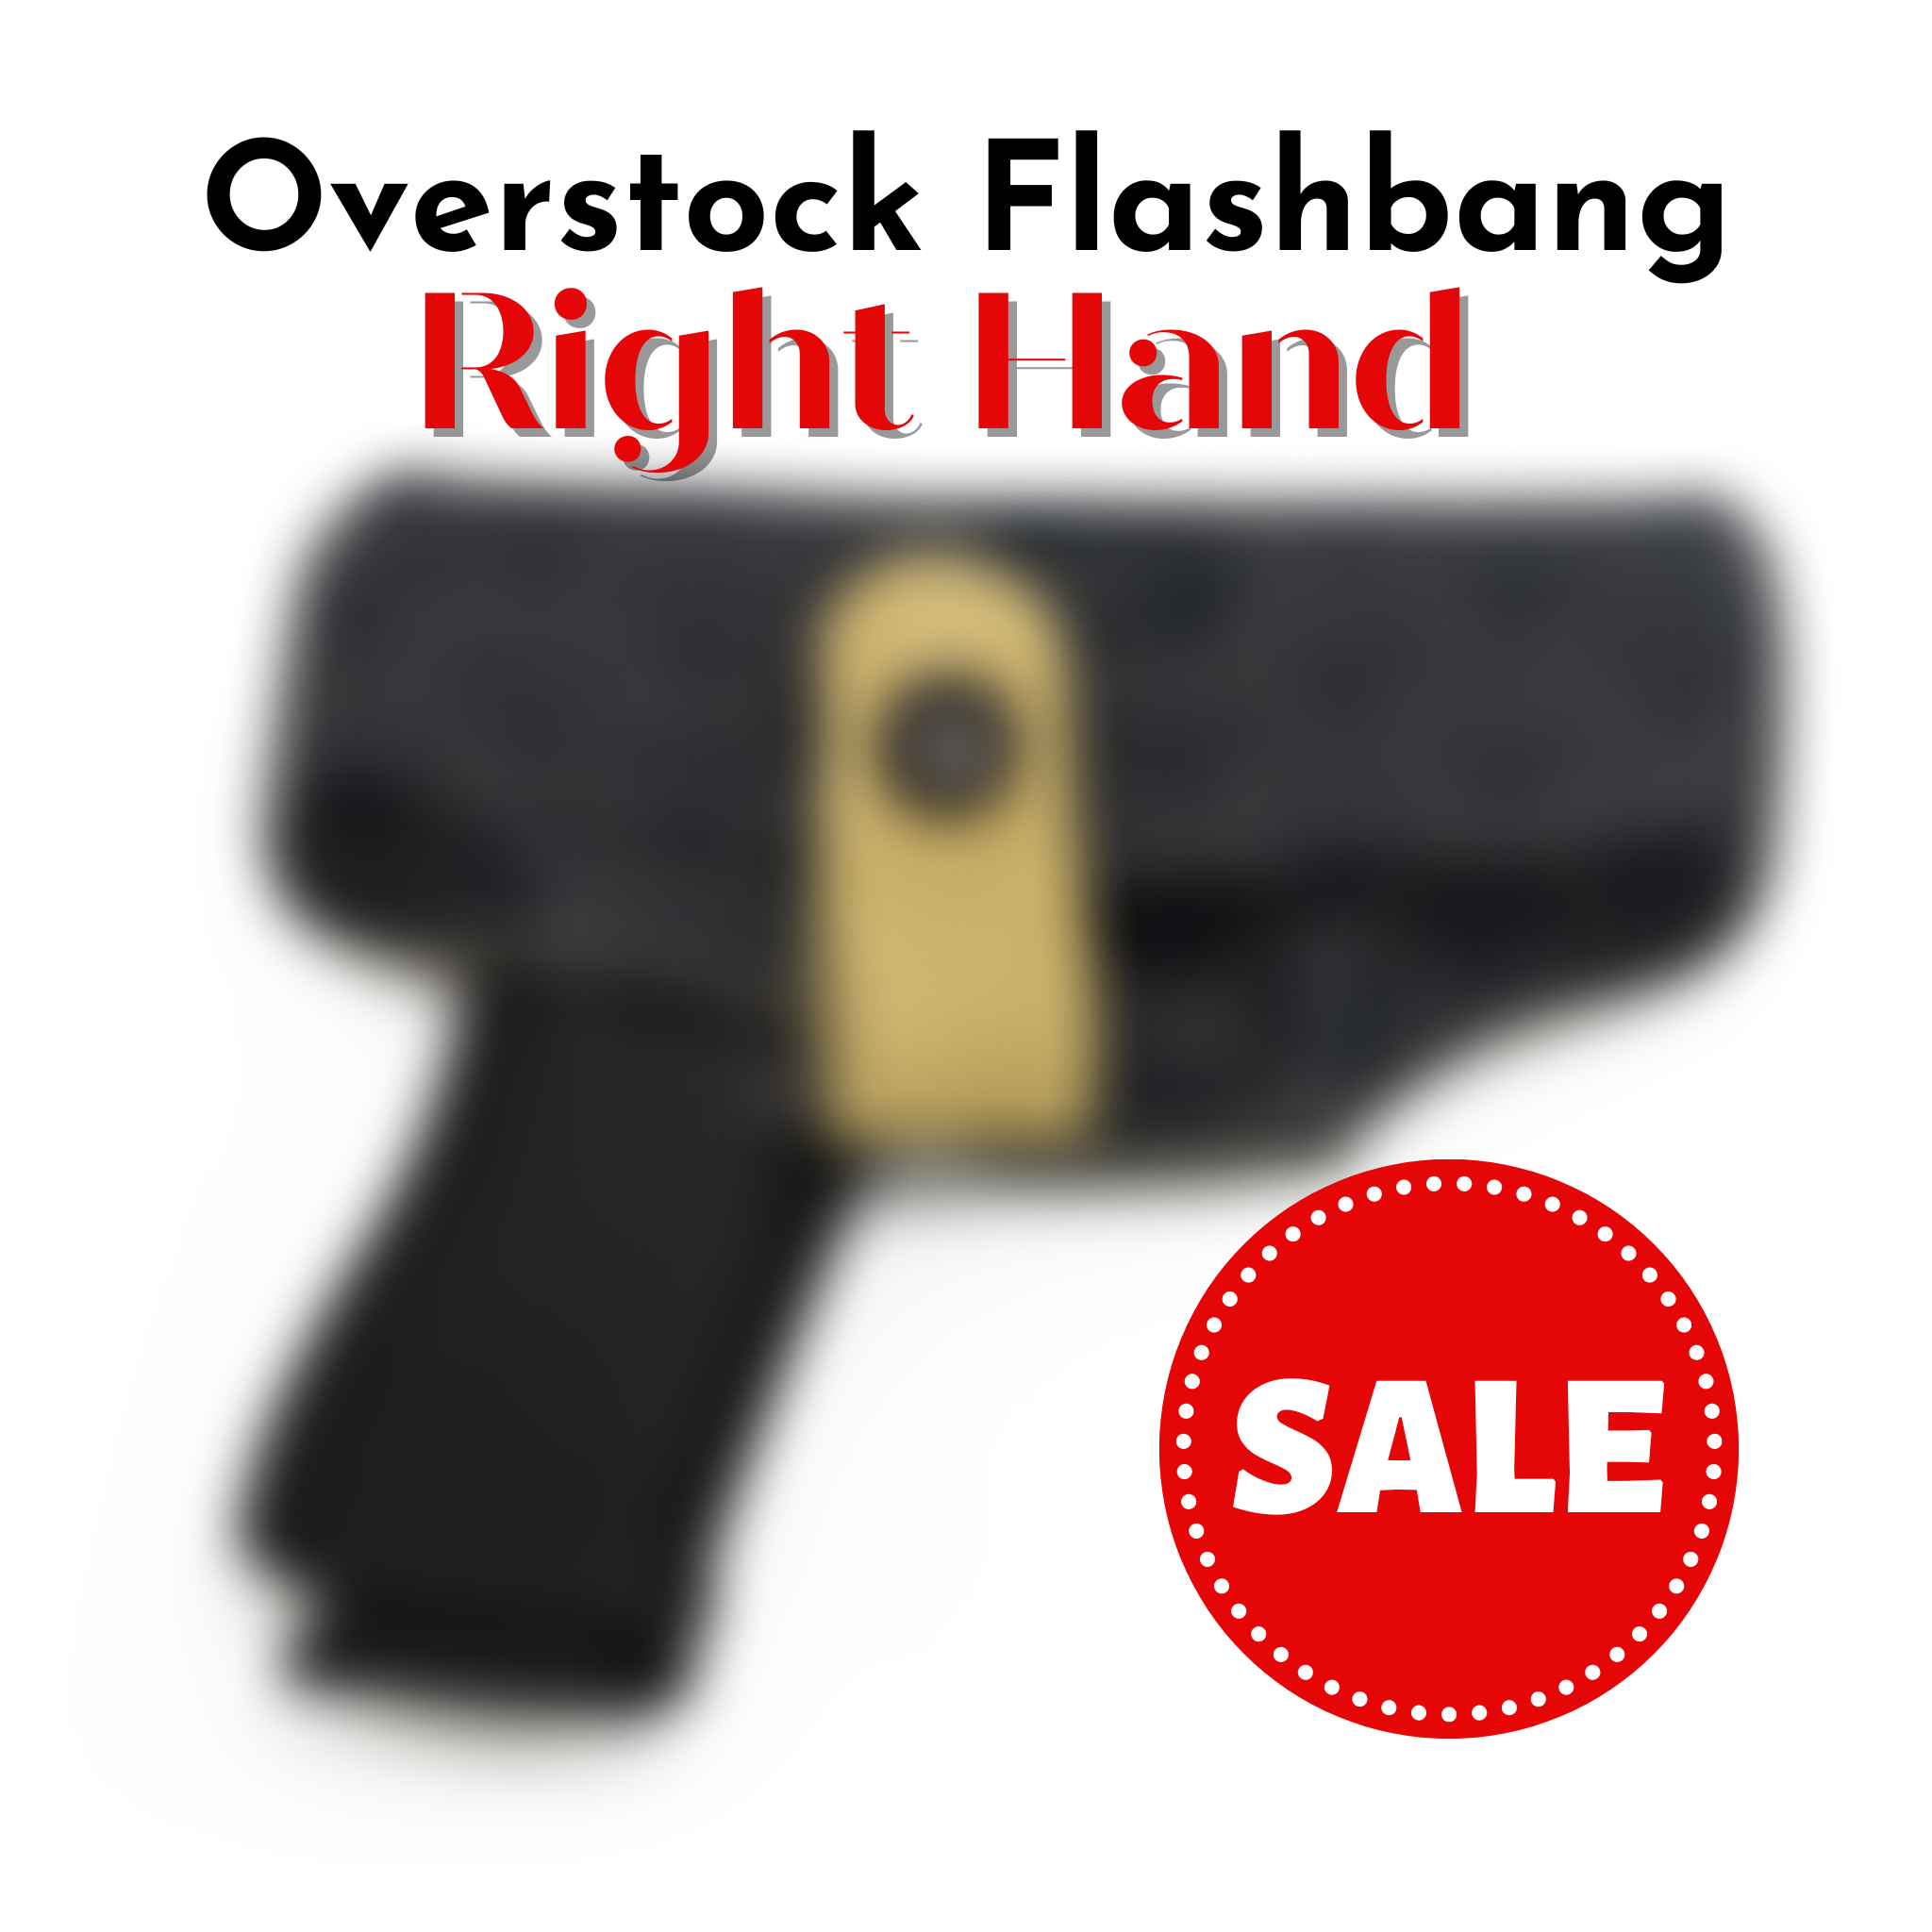 Flashbang Bra Holster Ruger Lc9 or Lc380 Right Handed for sale